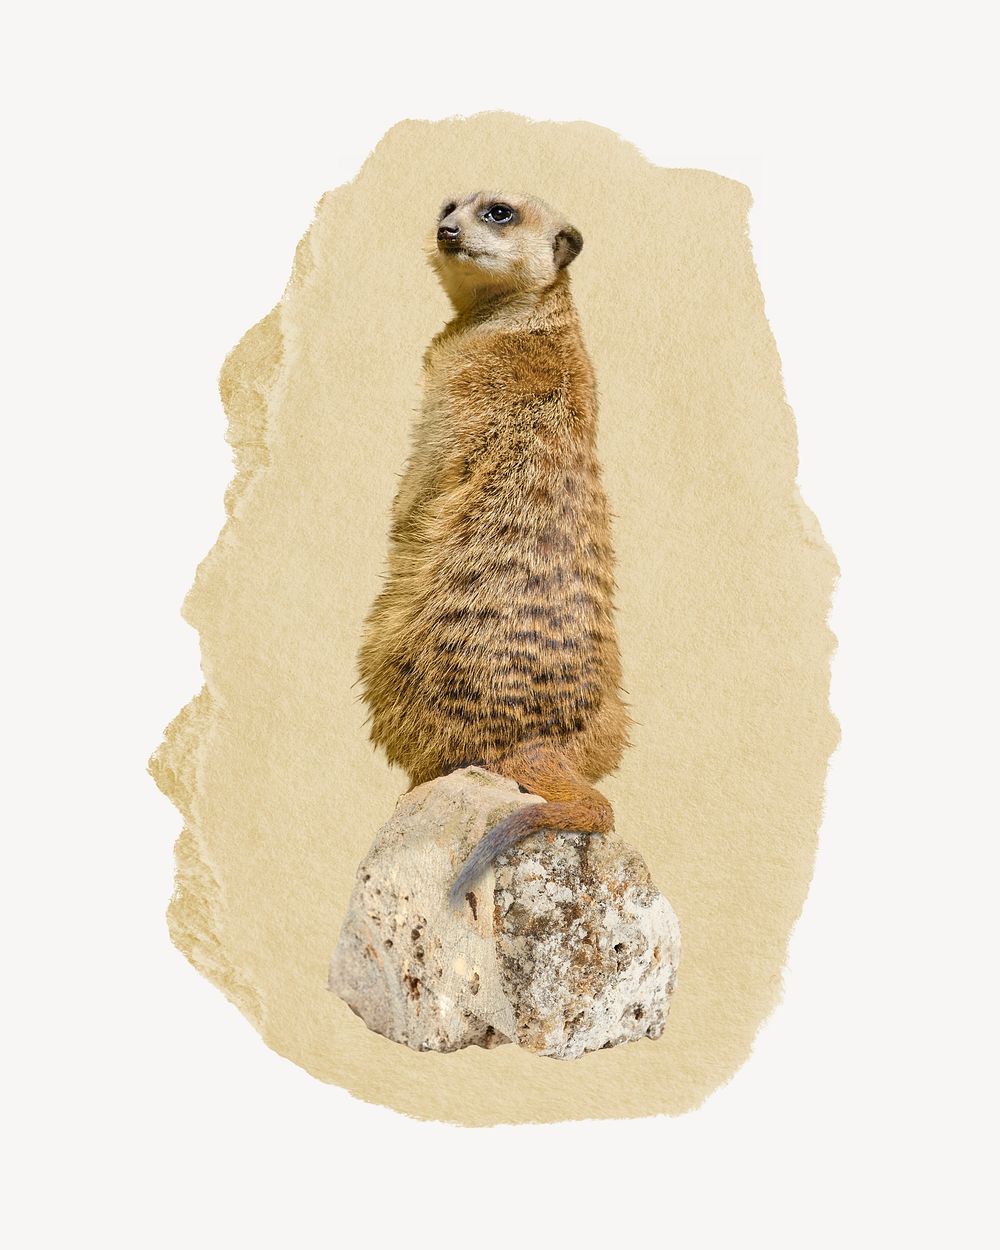 Meerkat, ripped paper collage element